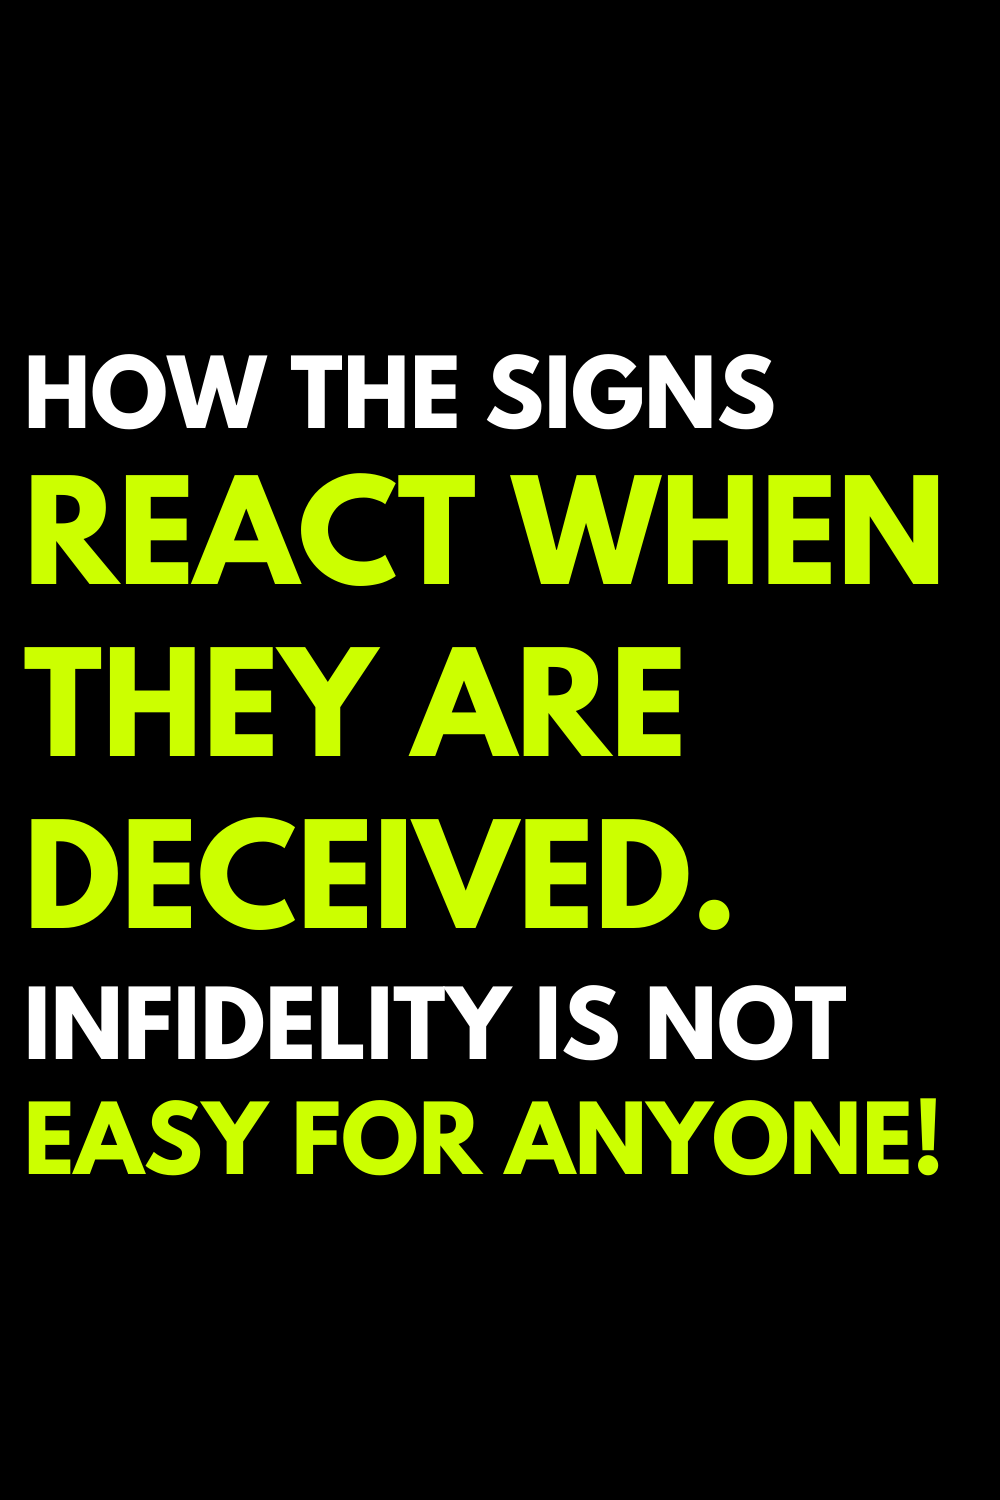 How the signs react when they are deceived. Infidelity is not easy for anyone!